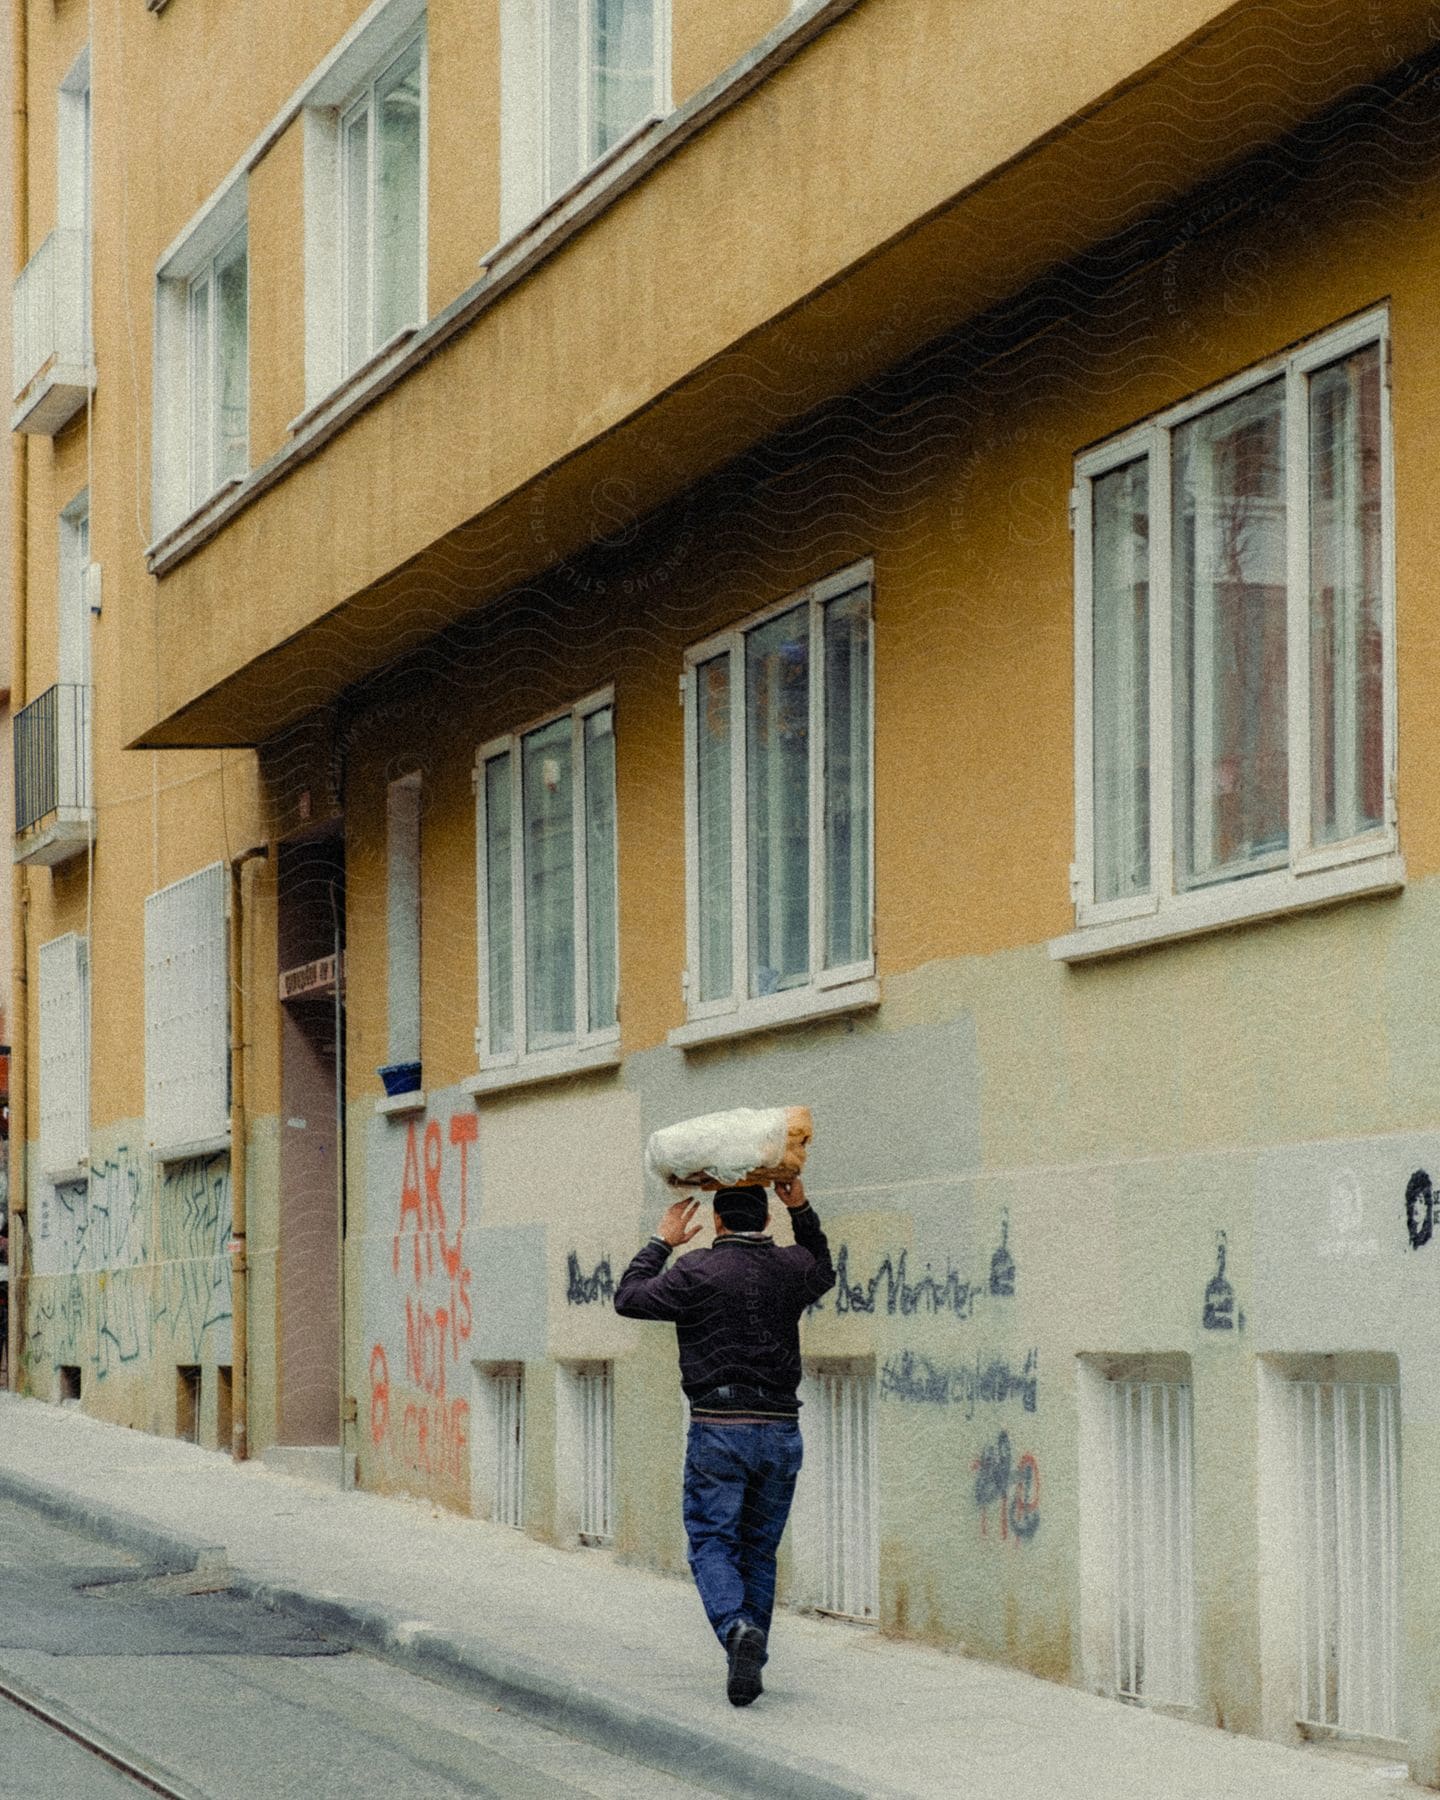 A person walks past a yellow building, carrying something on their shoulders, while graffiti decorates the wall.